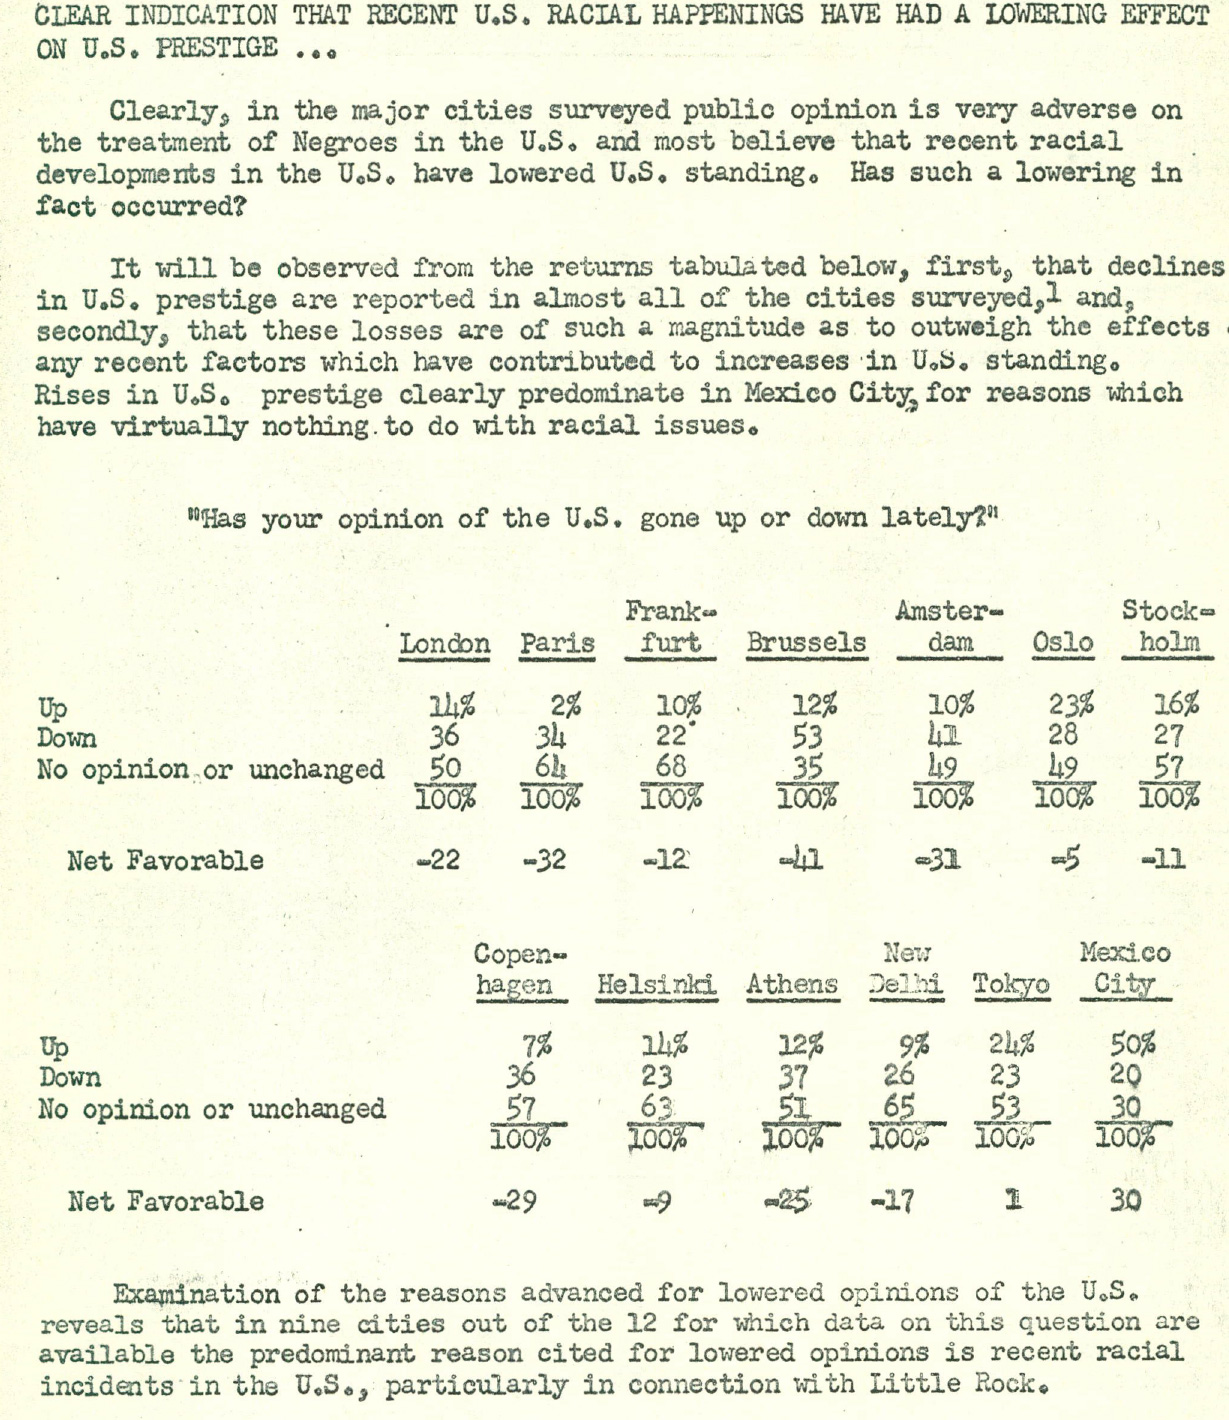 world opinions of US after little rock 1957